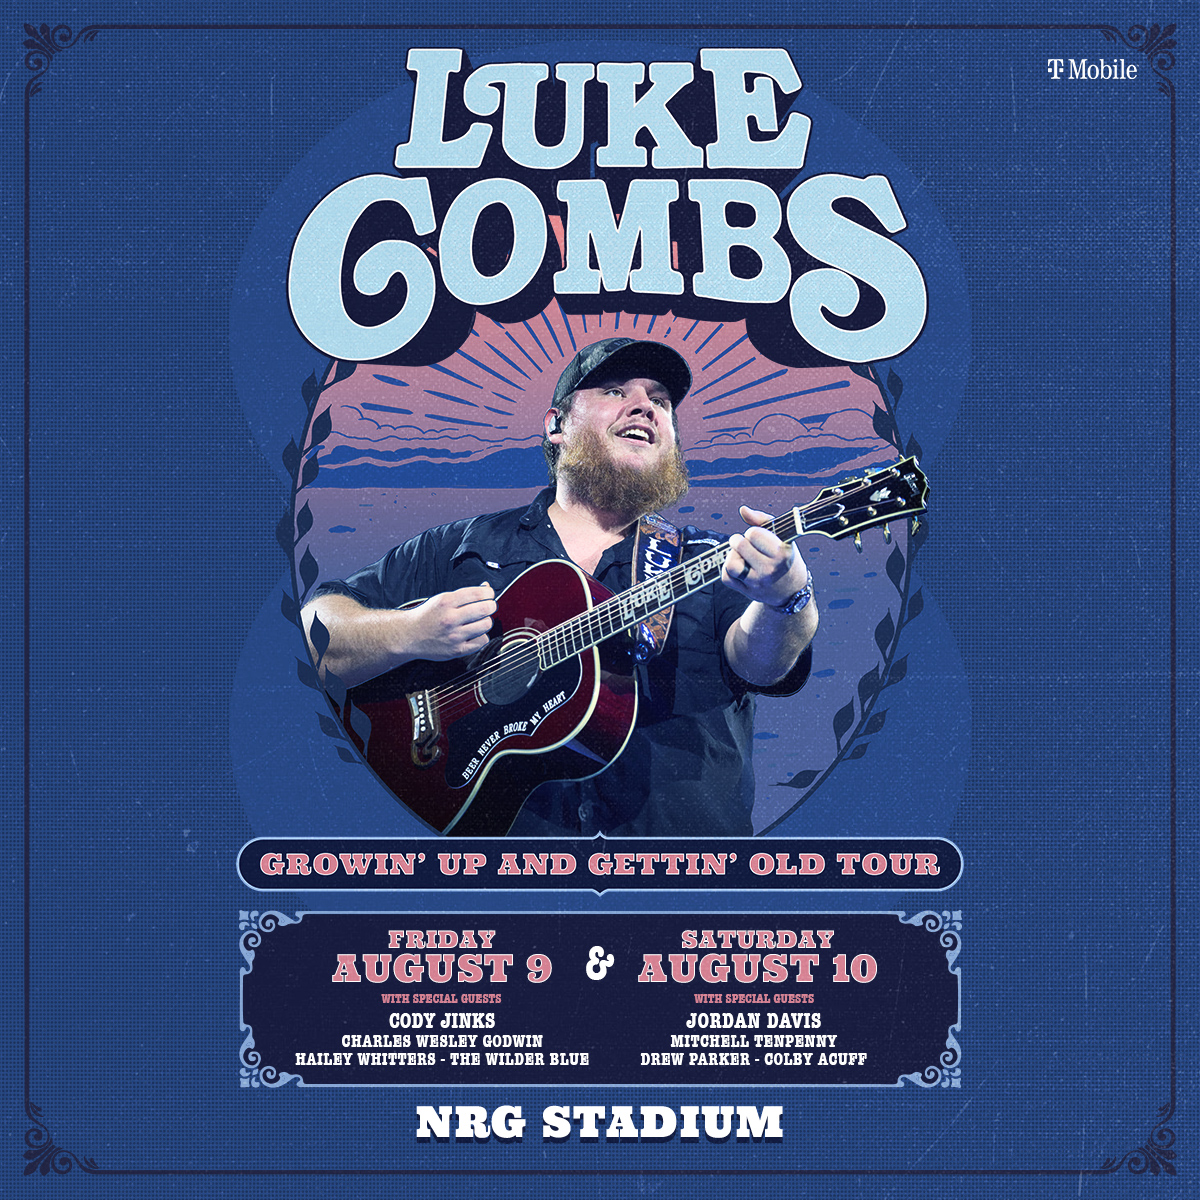 Text To Win Tickets To See Luke Combs In Houston!